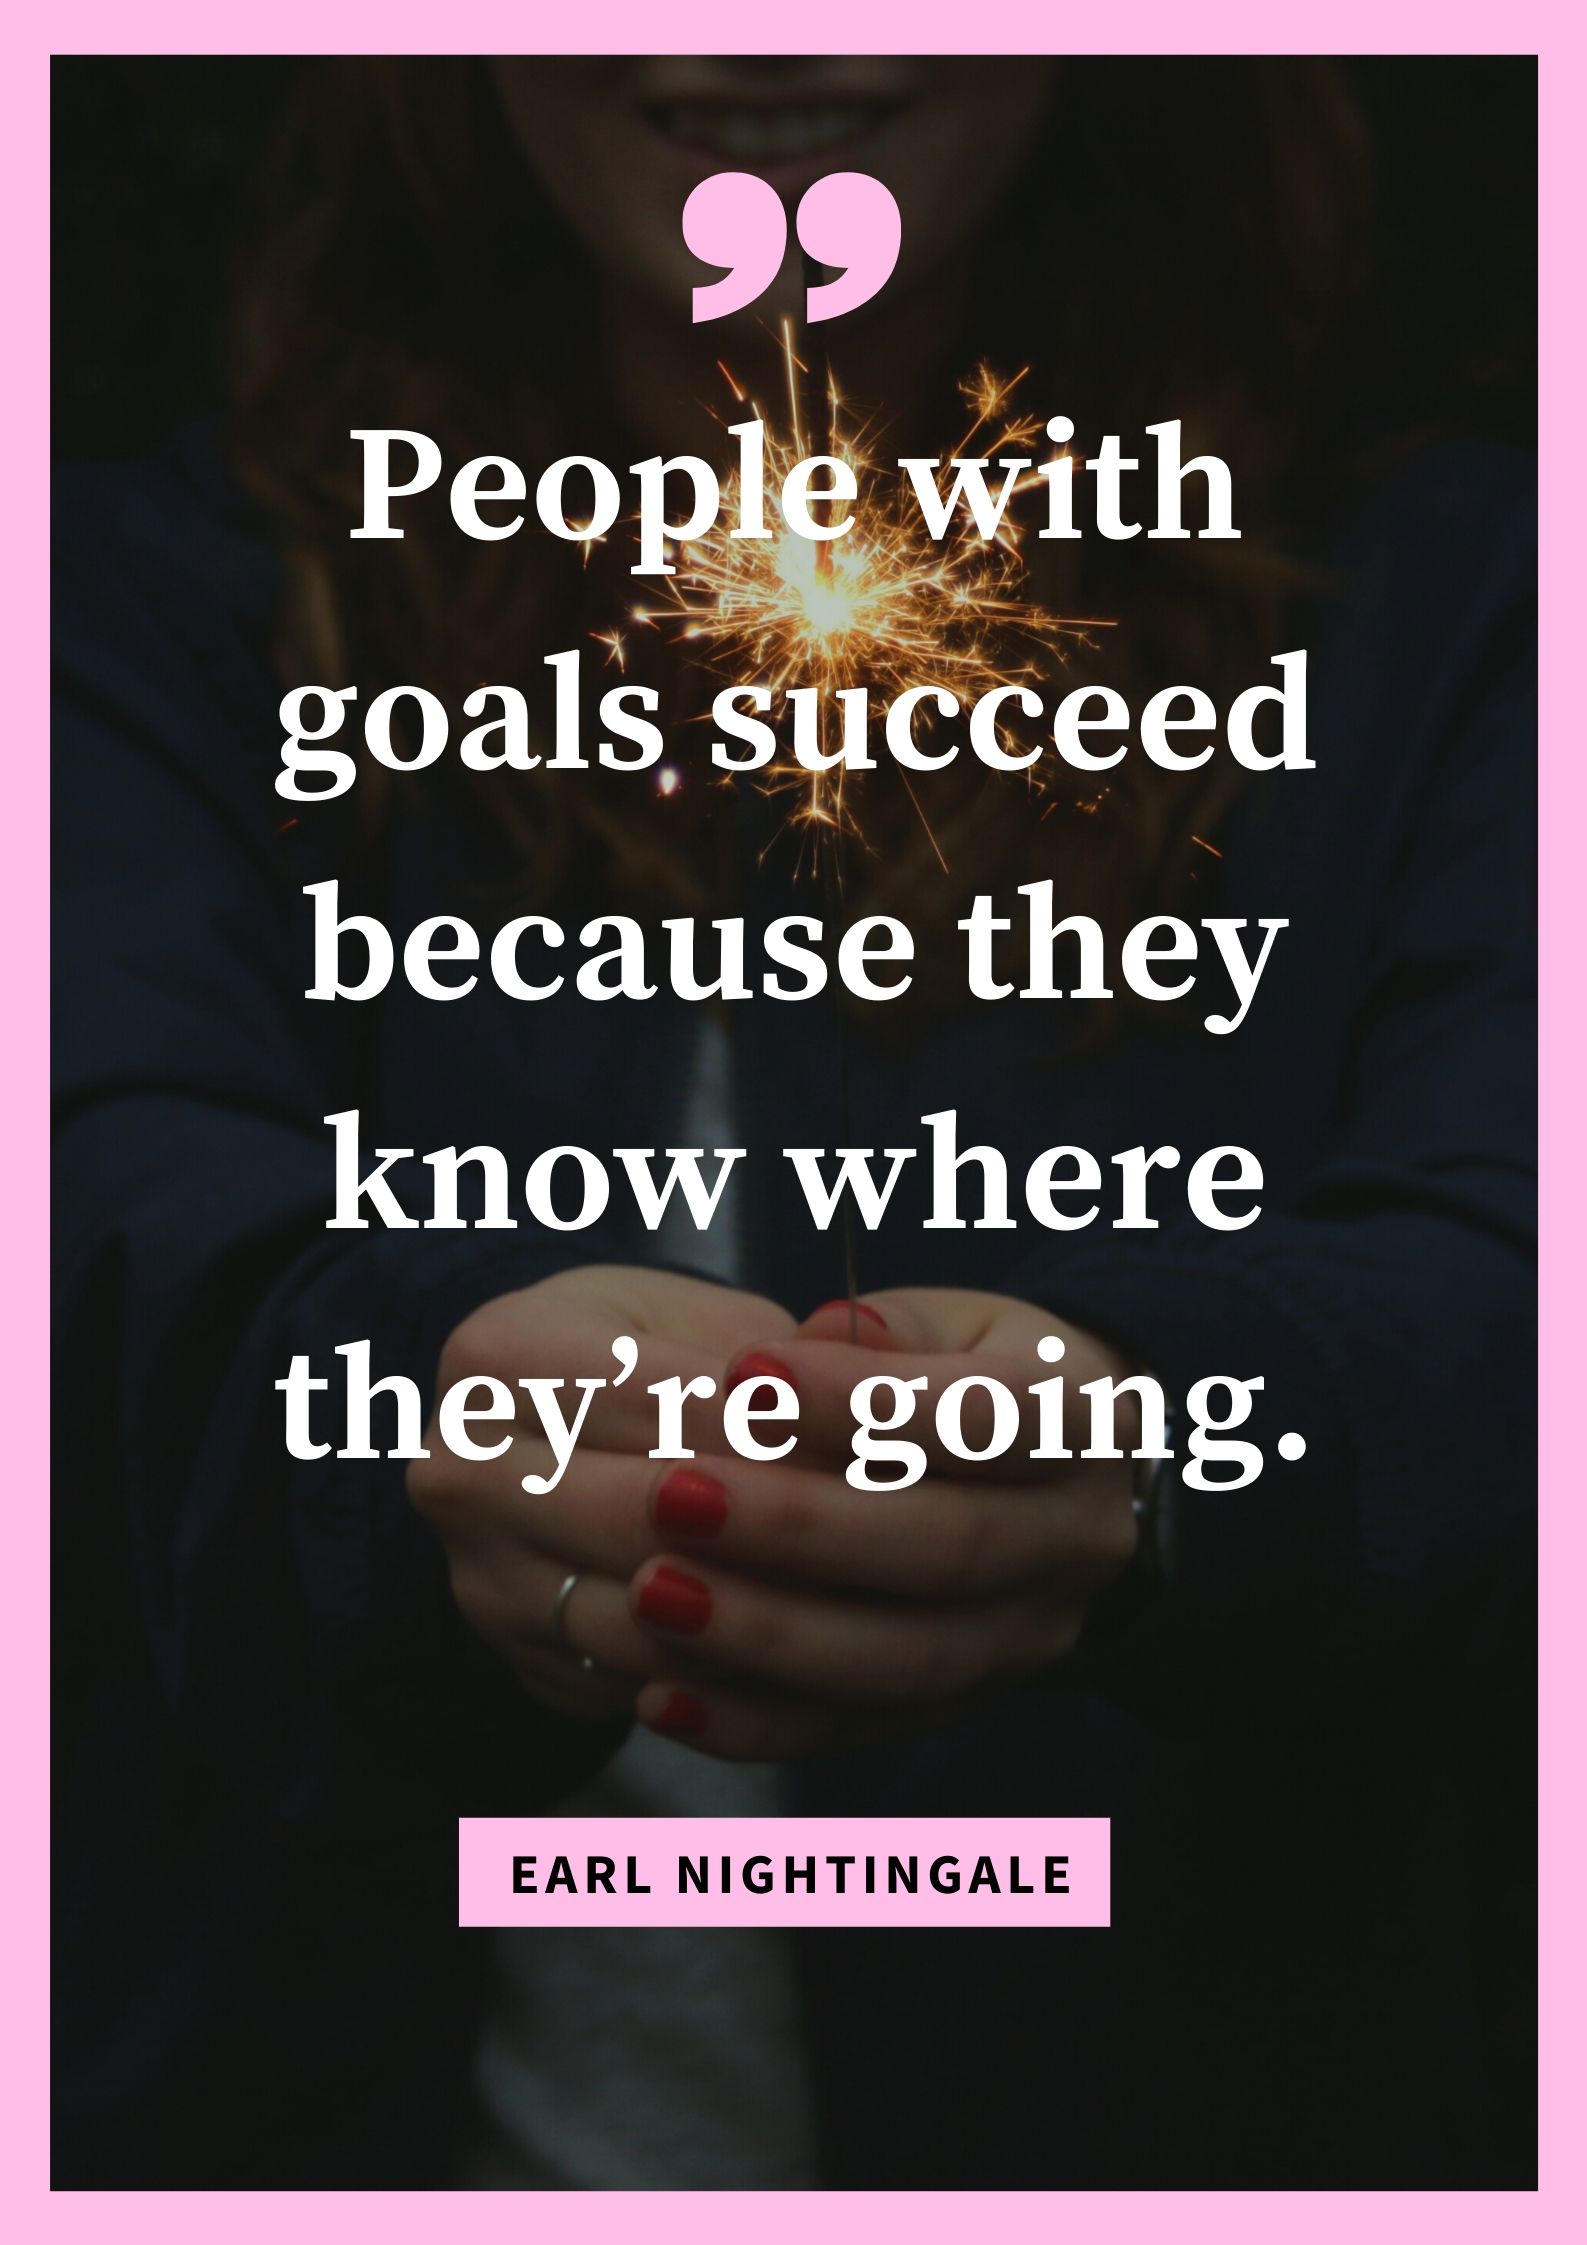 People with goals succeed because they know where they’re going.